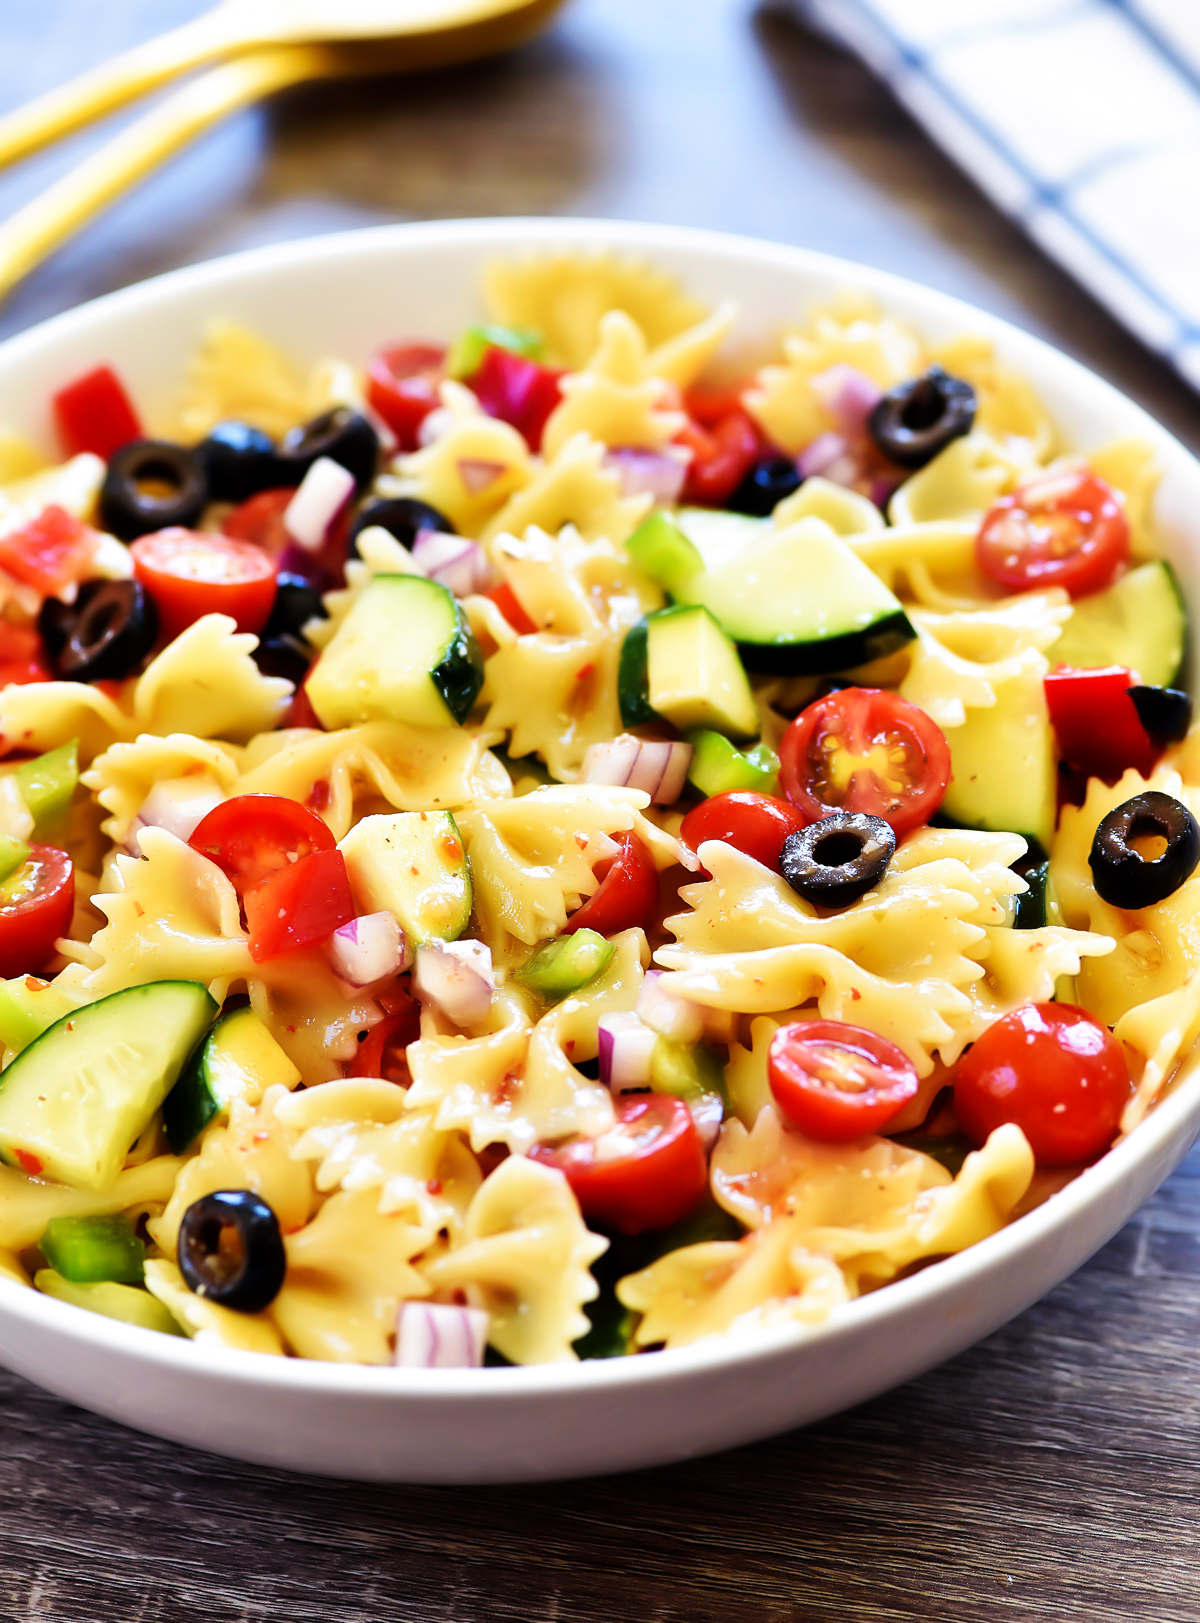 California Pasta Salad is a delicious pasta salad filled with fresh vegetables, Italian dressing and parmesan cheese. Life-in-the-Lofthouse.com